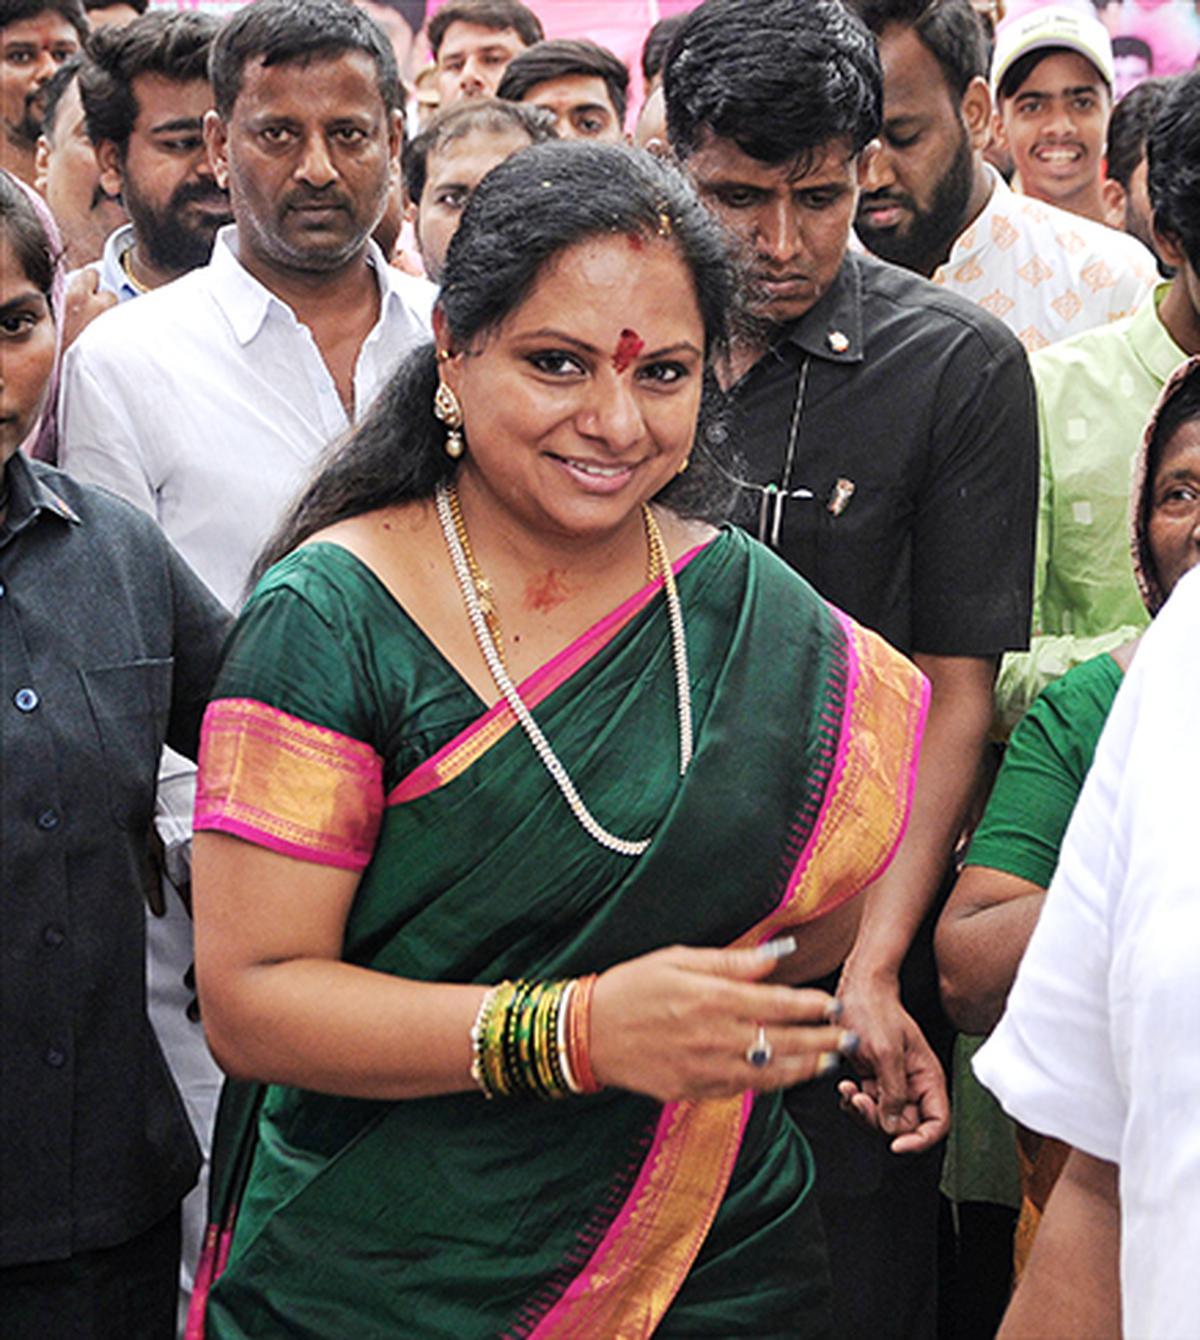 Kavitha ridicules Arvind’s claim of her speaking to AICC chief